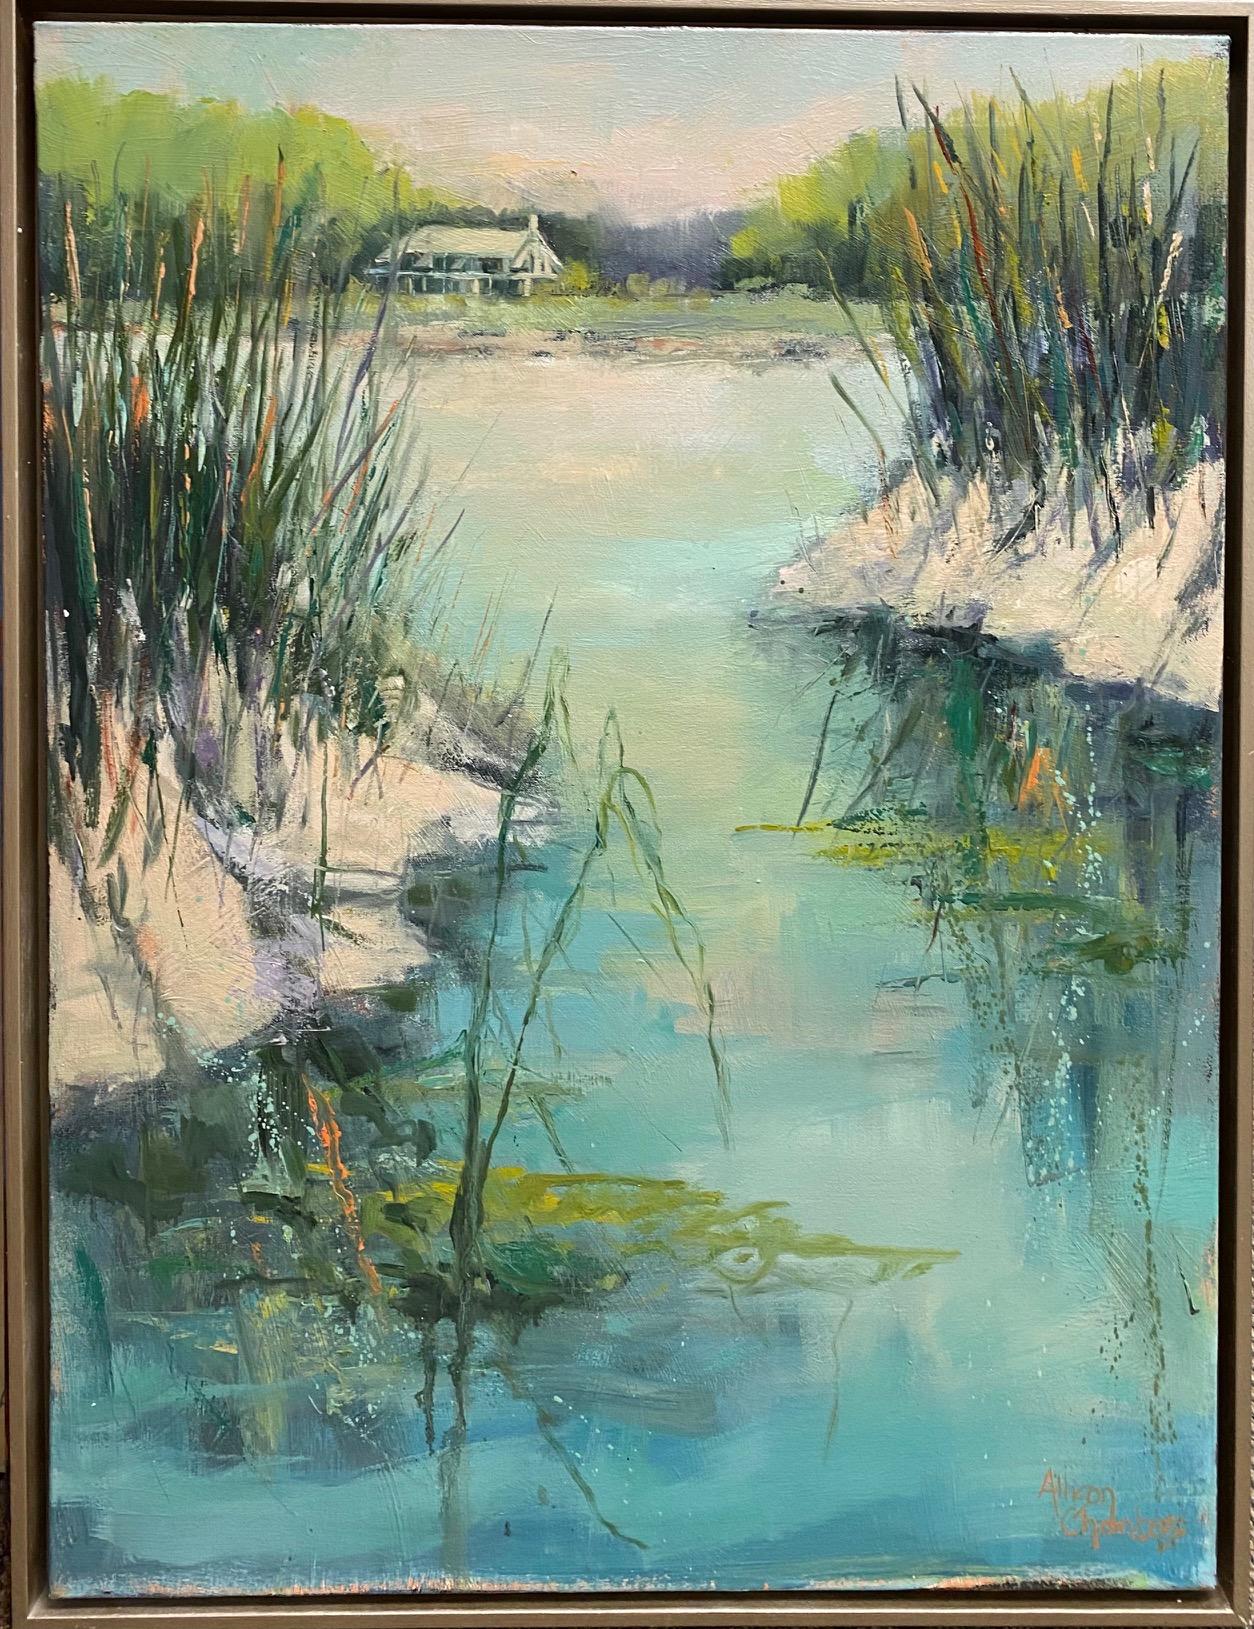 Allison Chambers Abstract Painting - Through the Weeds II original 40x30 abstract expressionist marine landscape